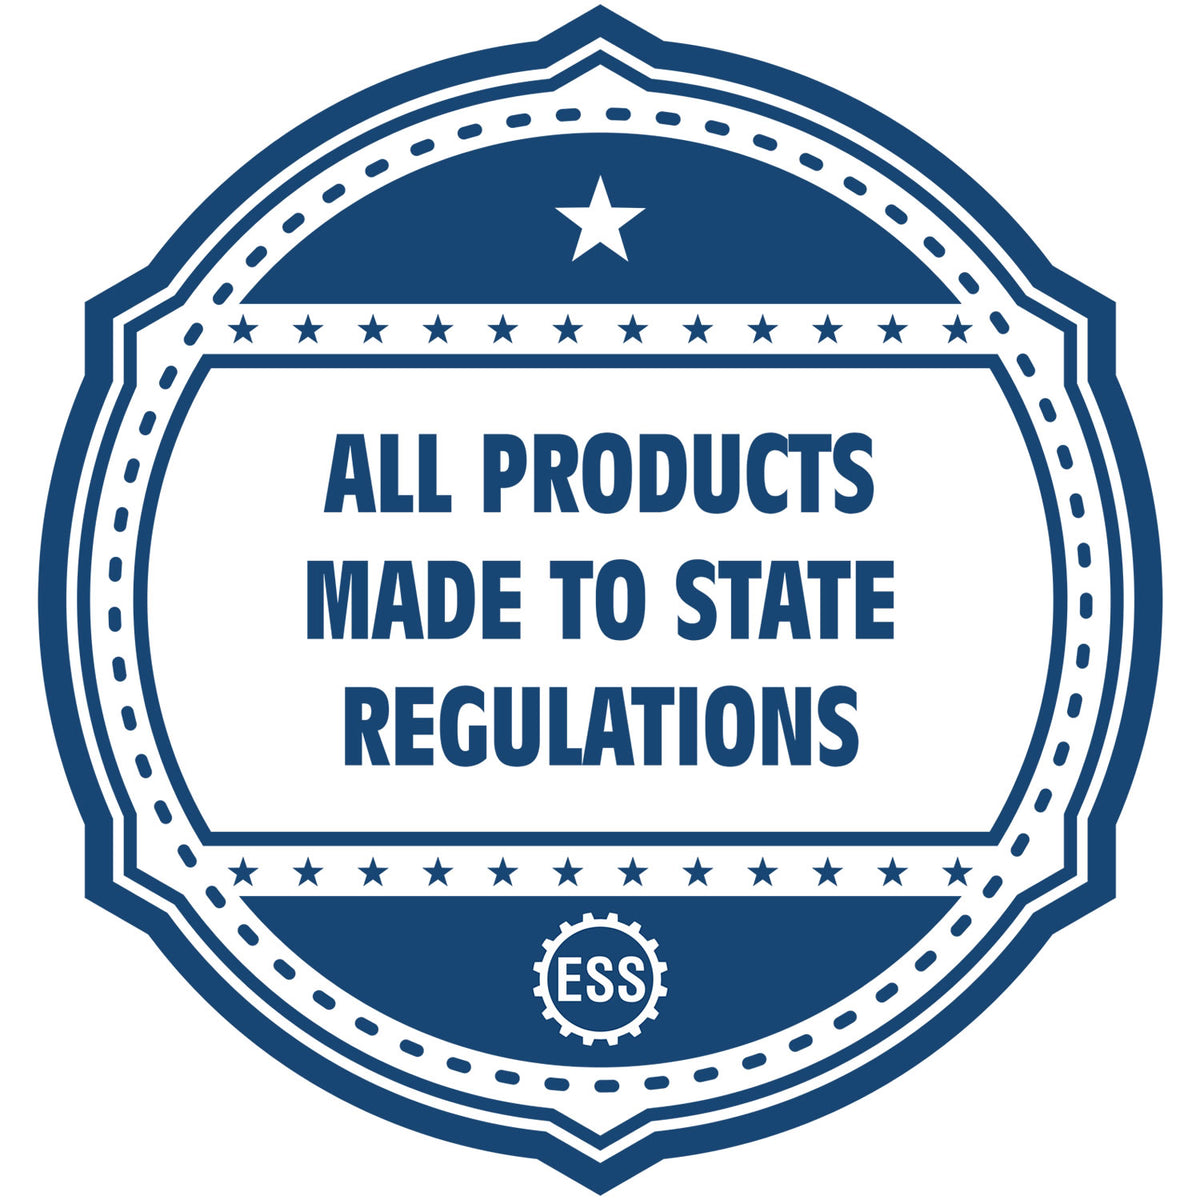 A blue icon or badge for the Hybrid North Carolina Landscape Architect Seal showing that this product is made in compliance with state regulations.